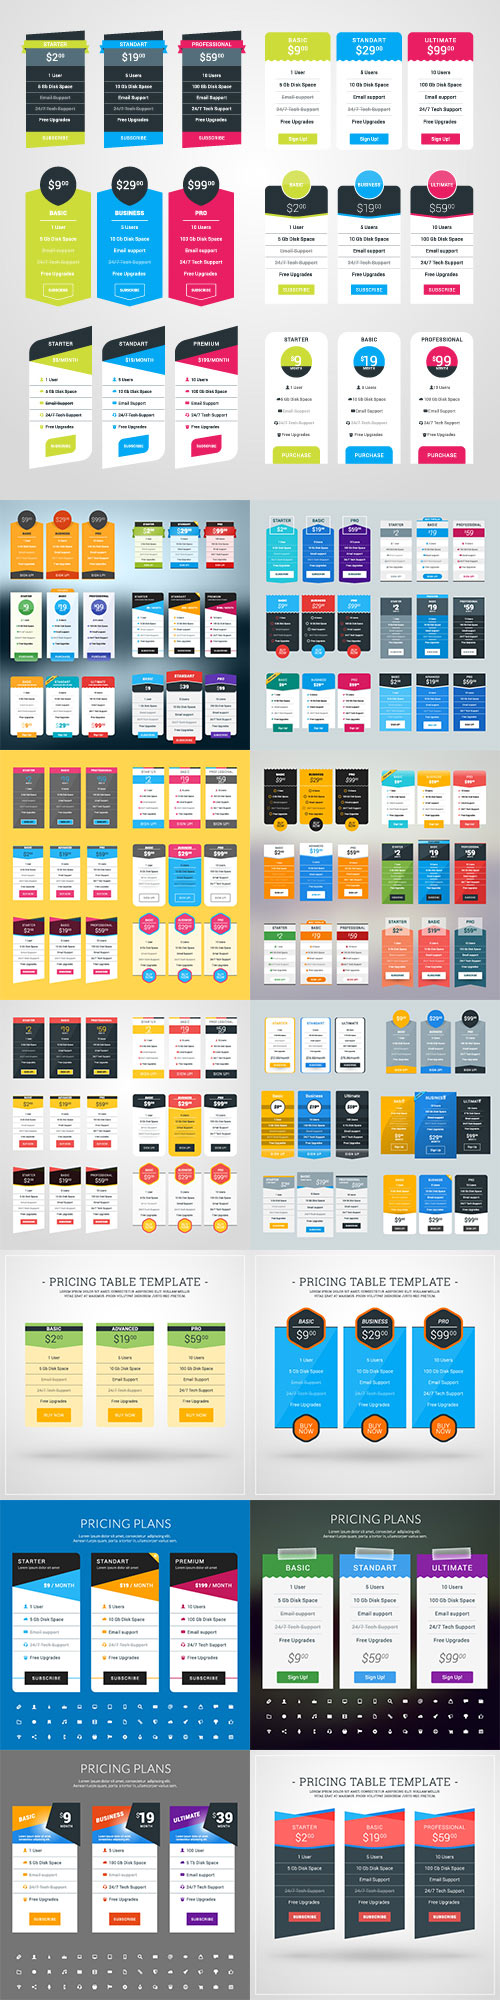 Vectors - Banner for Pricing Table for Websites and Applications